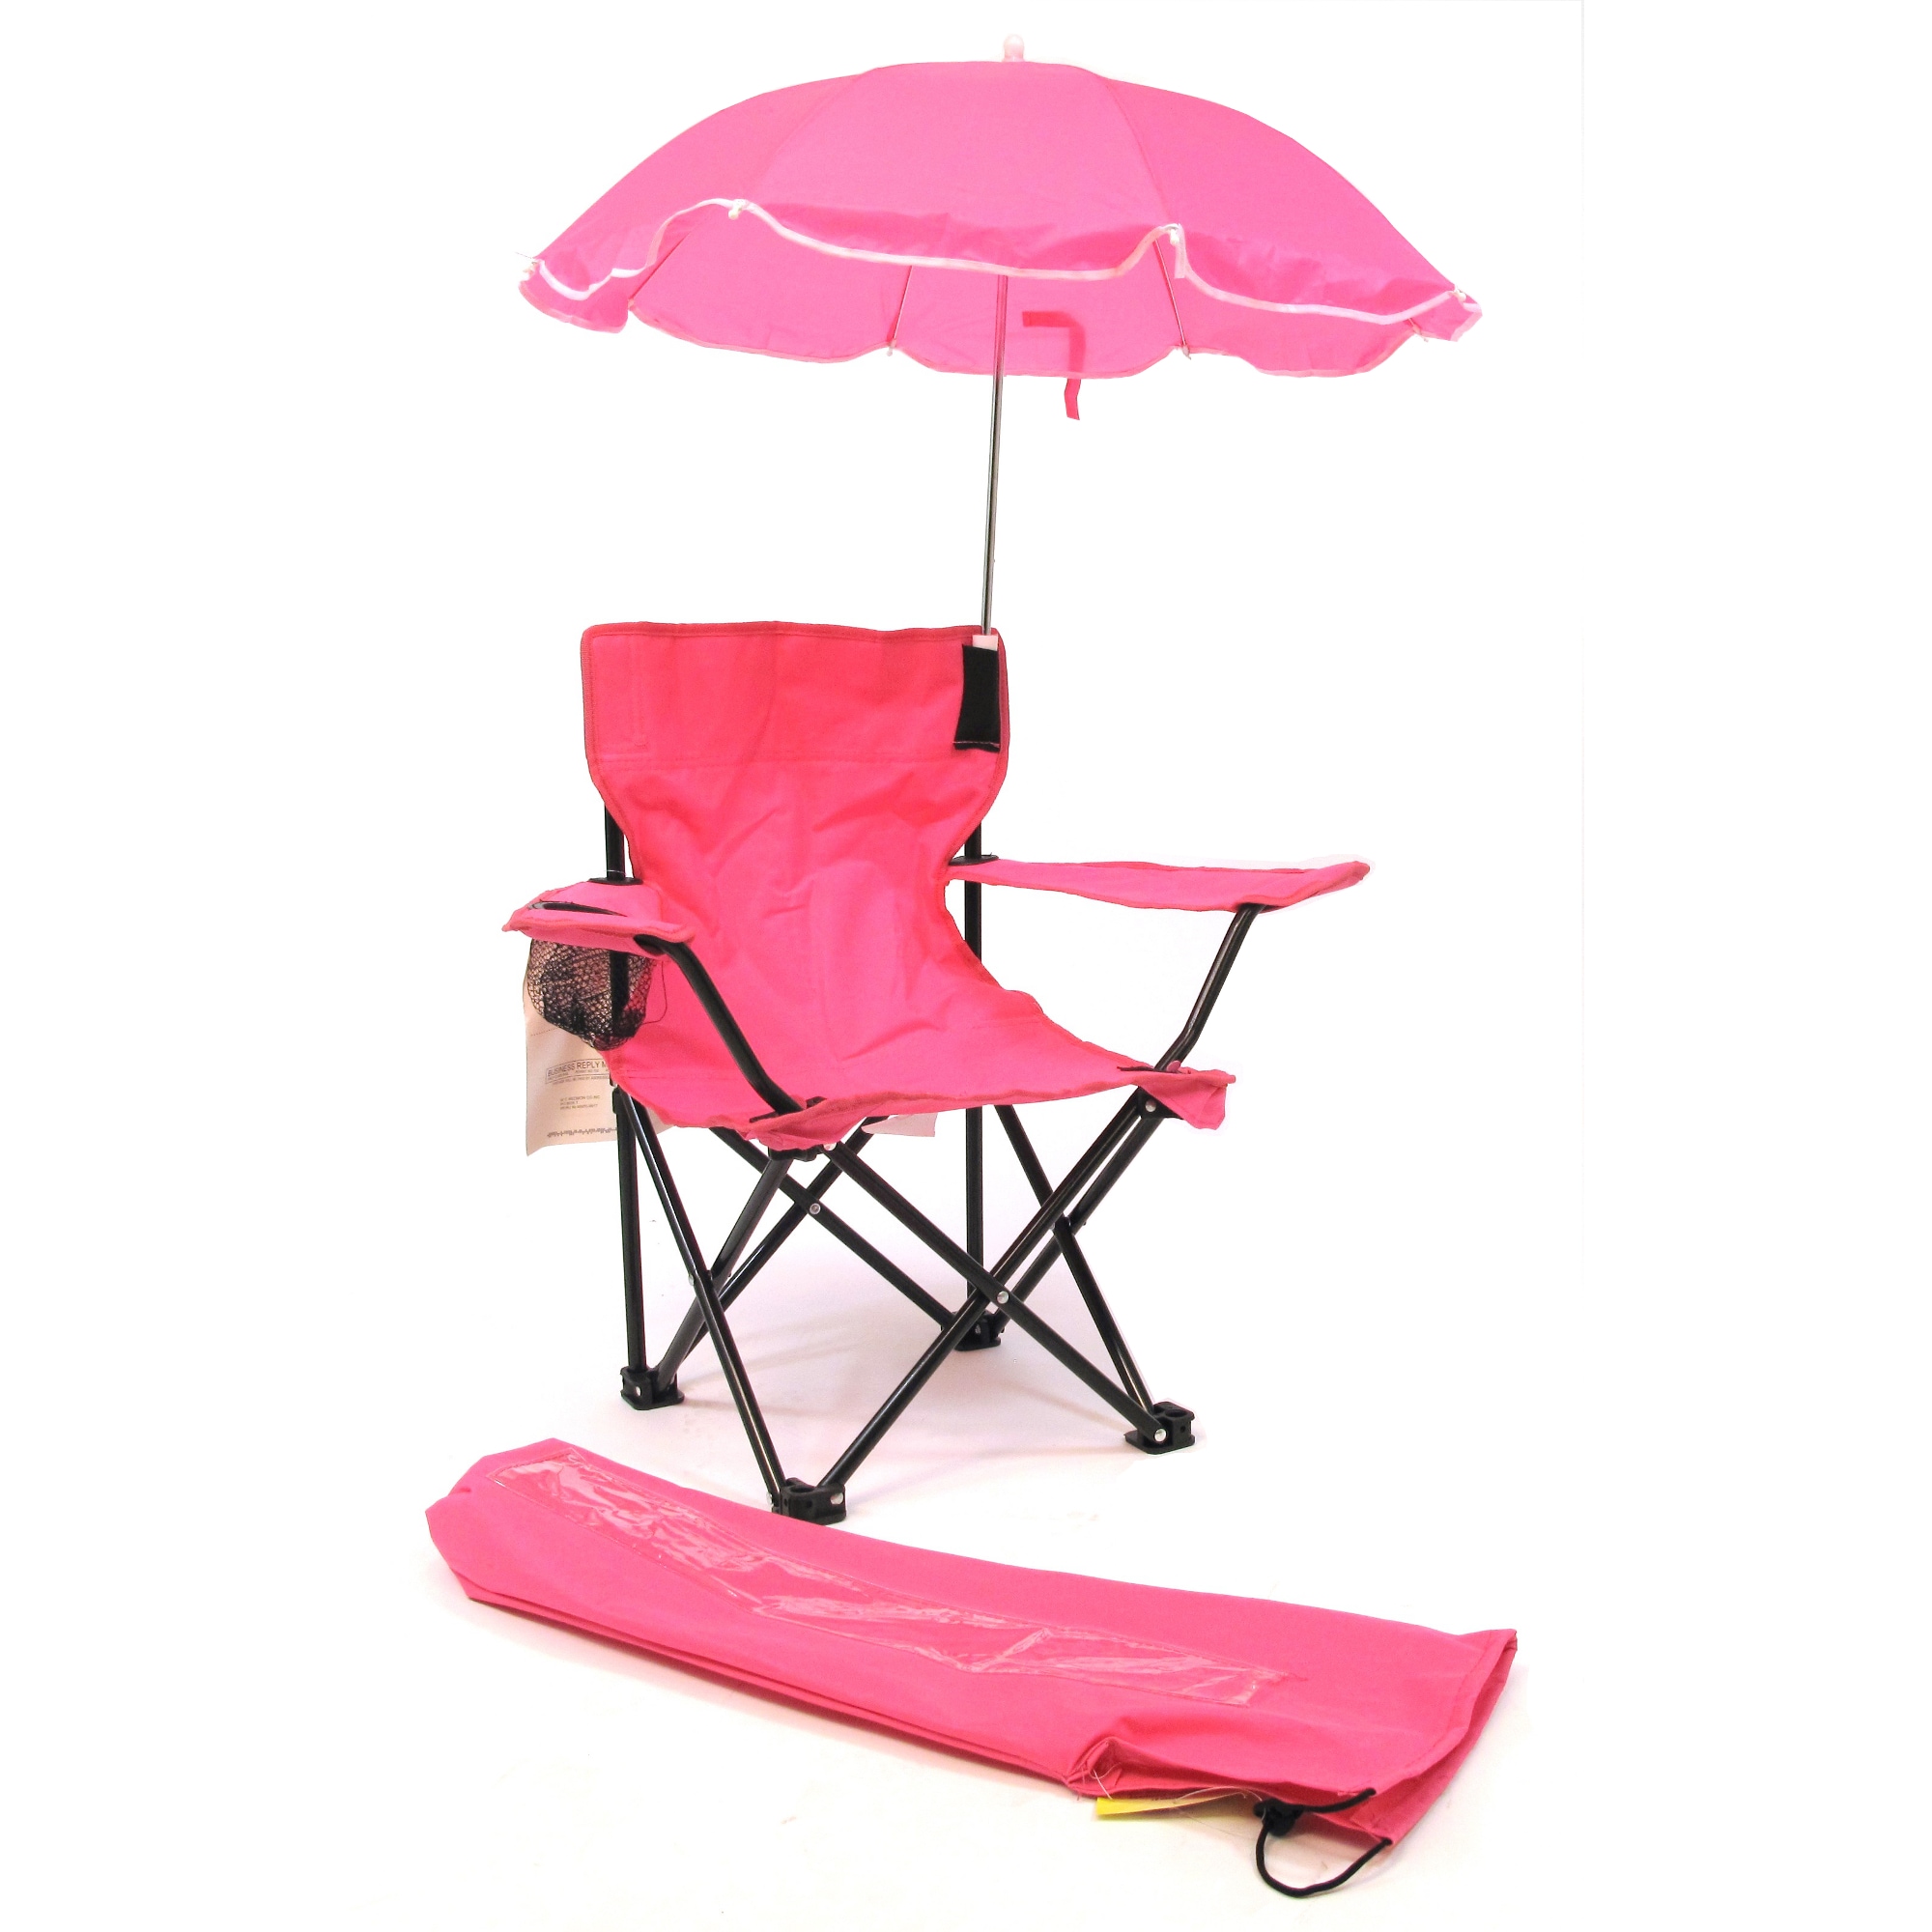 Wilson Digi Camo Pink Camping/Fishing Chair with Lined Cooler